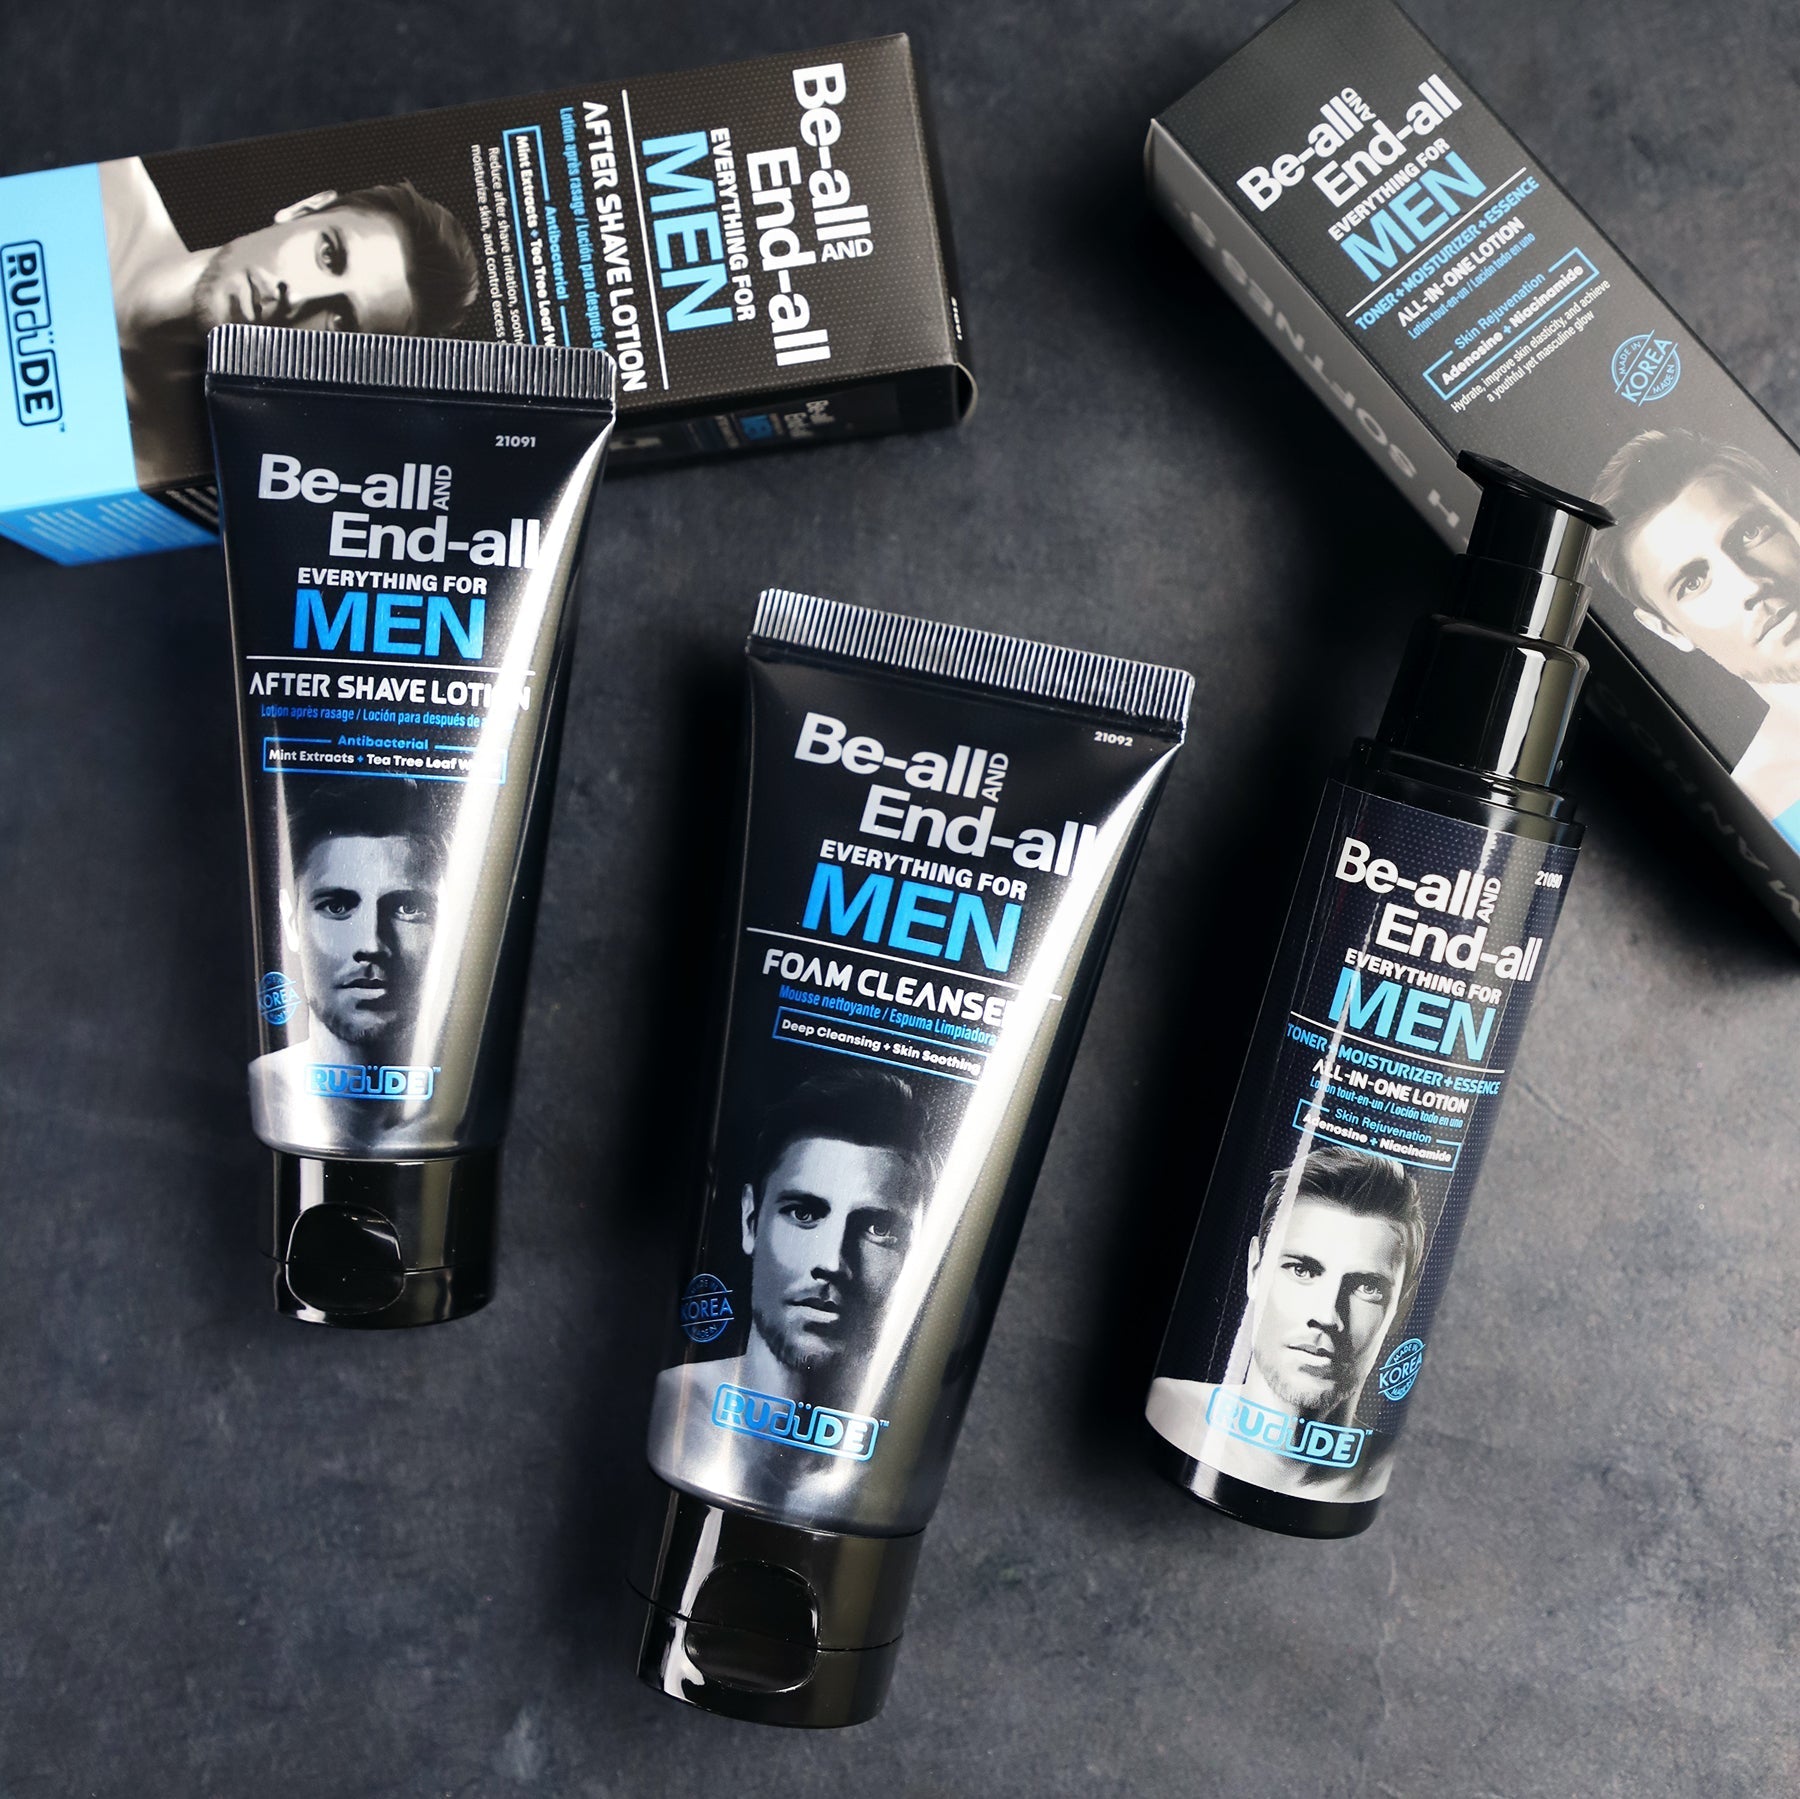 RUduDE Be-all and End-all All-in-One Lotion for Men